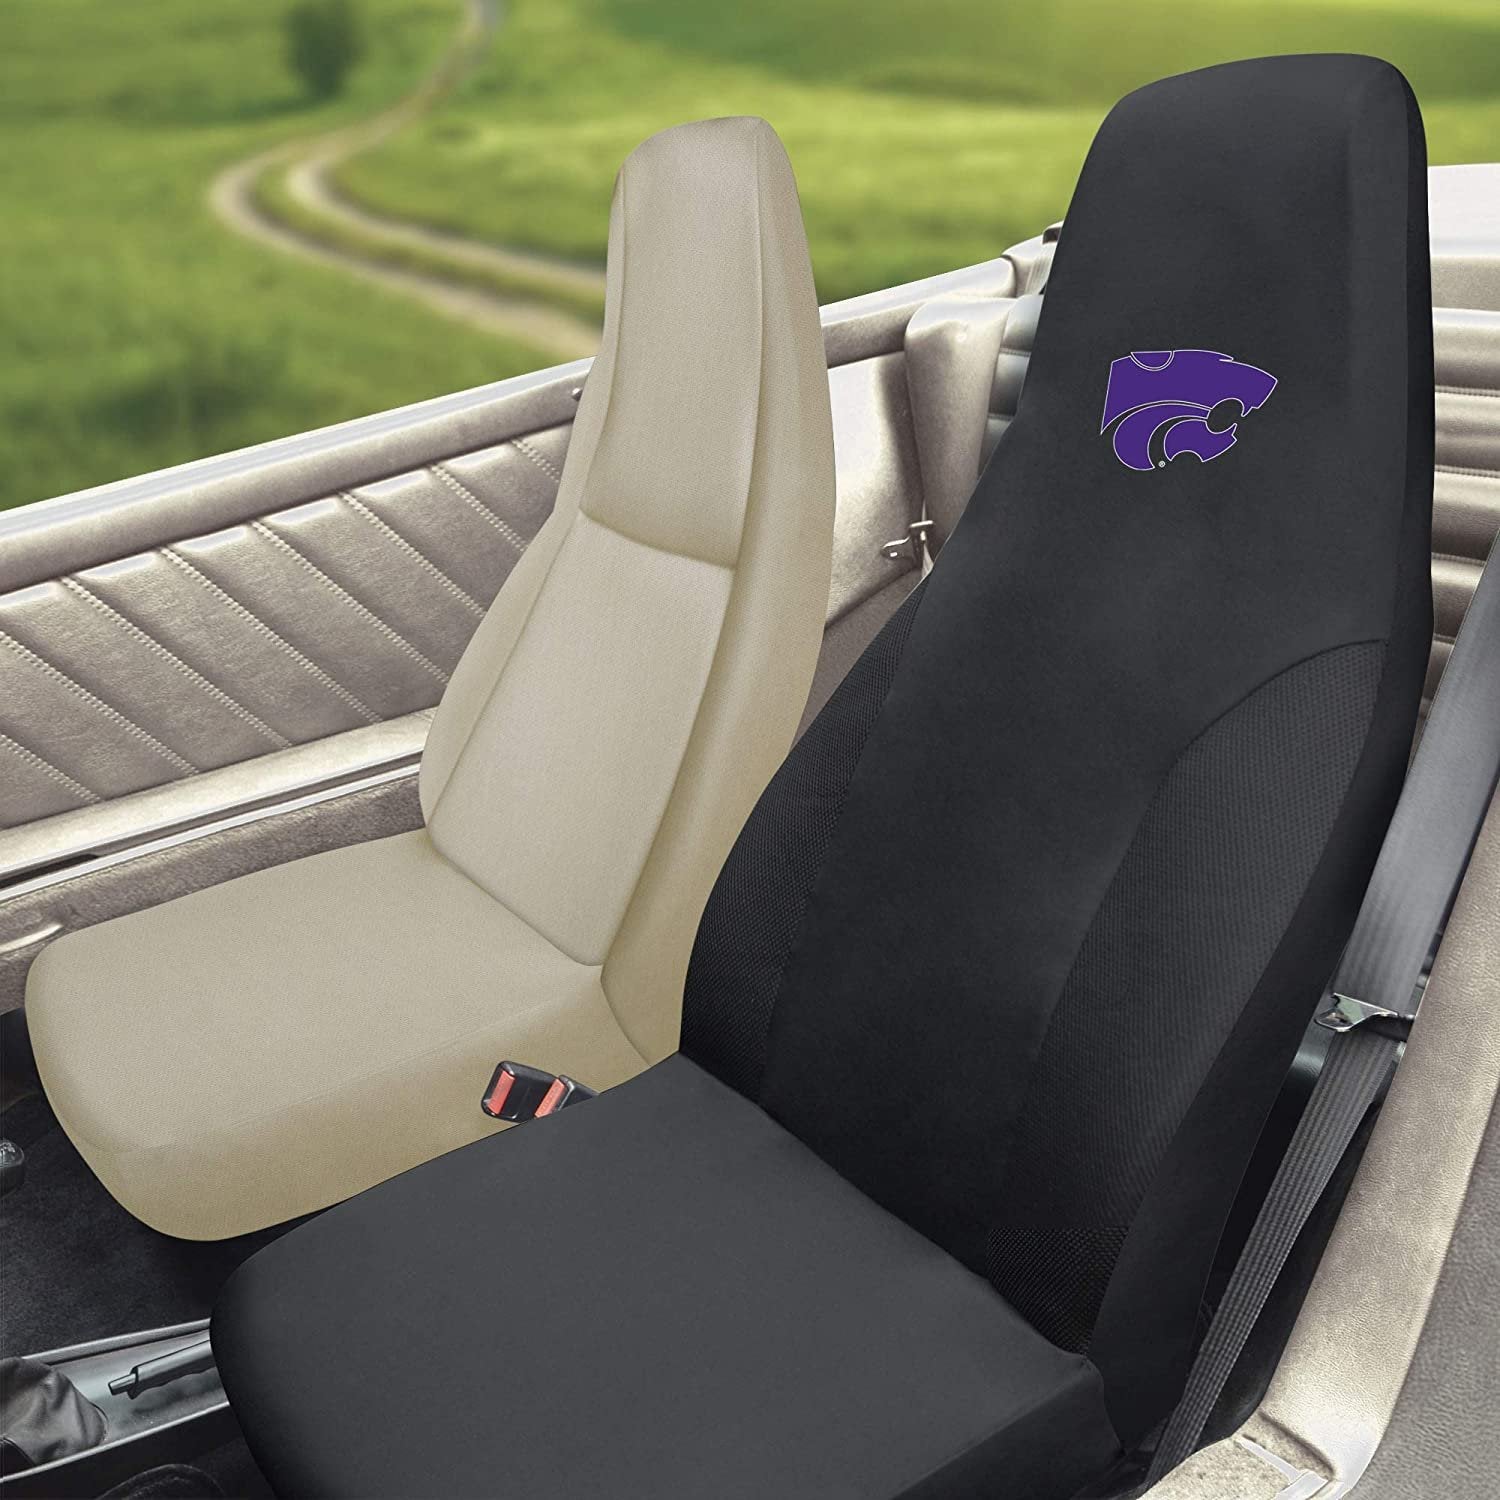 Kansas State Wildcats Bucket Auto Seat Cover 48x20 Inch Elastic